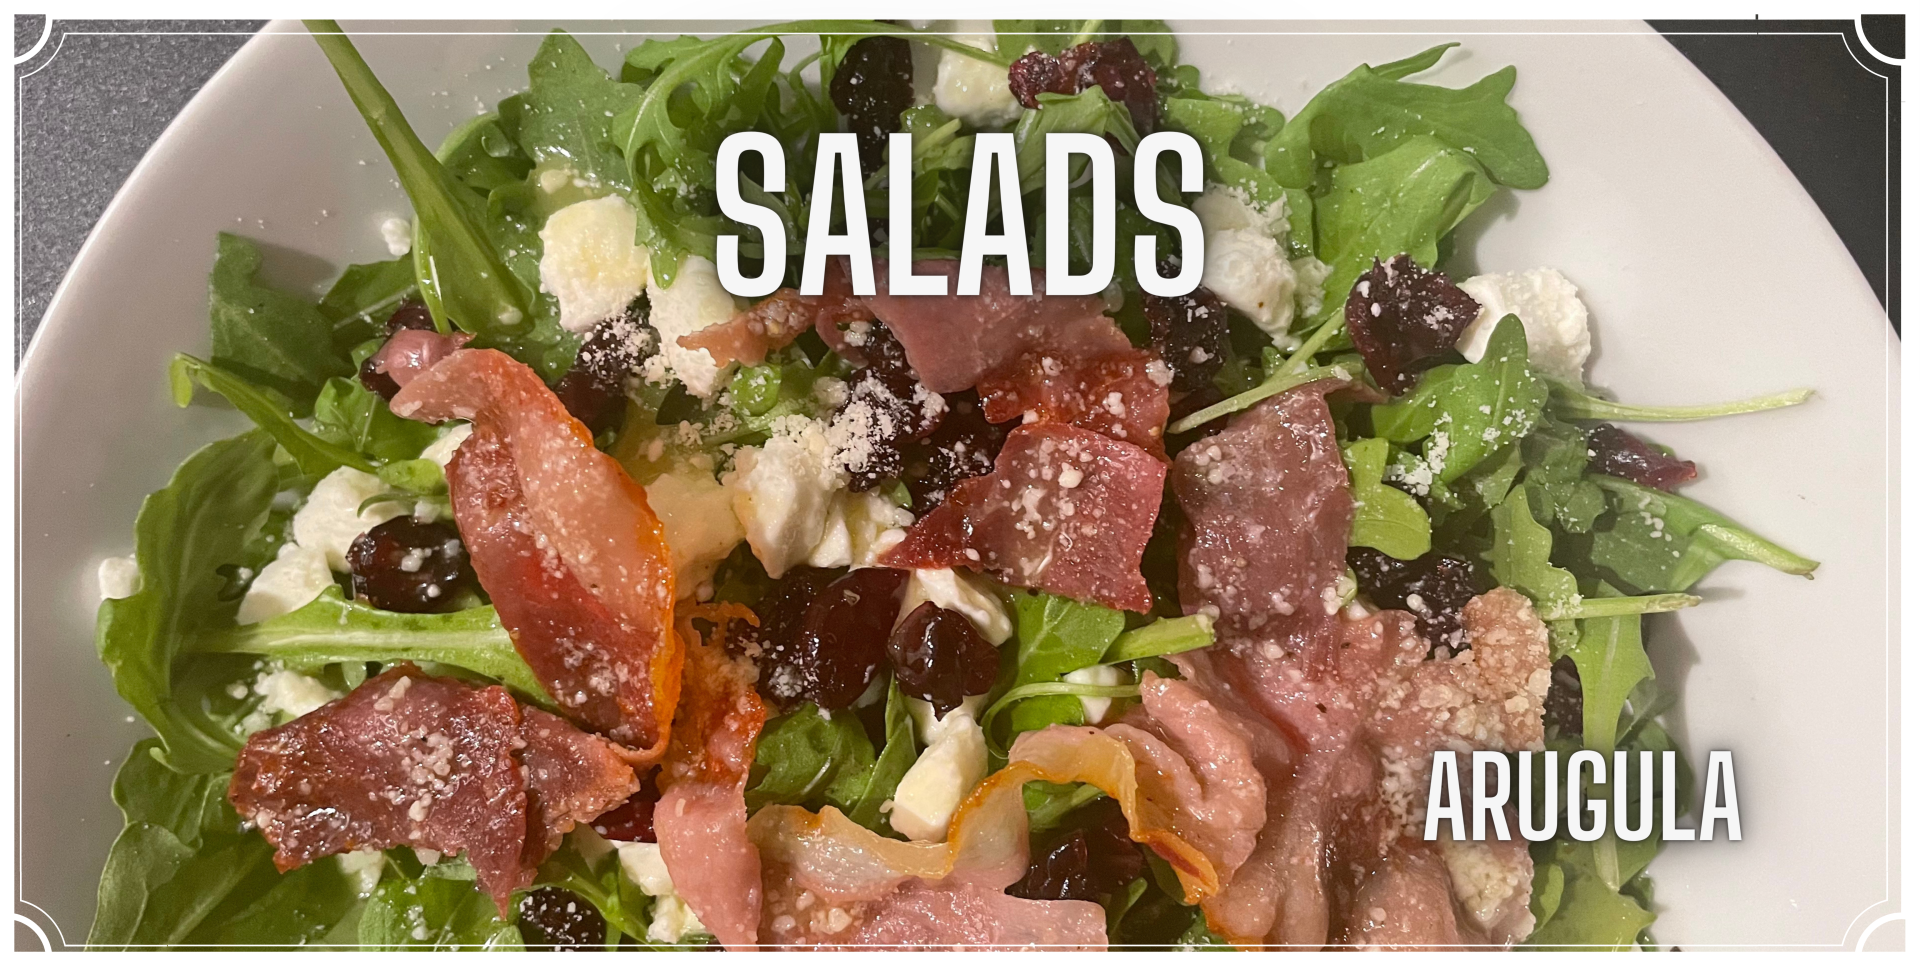 Our dine-in menu of Italian salads at Marcos Italian Restaurant